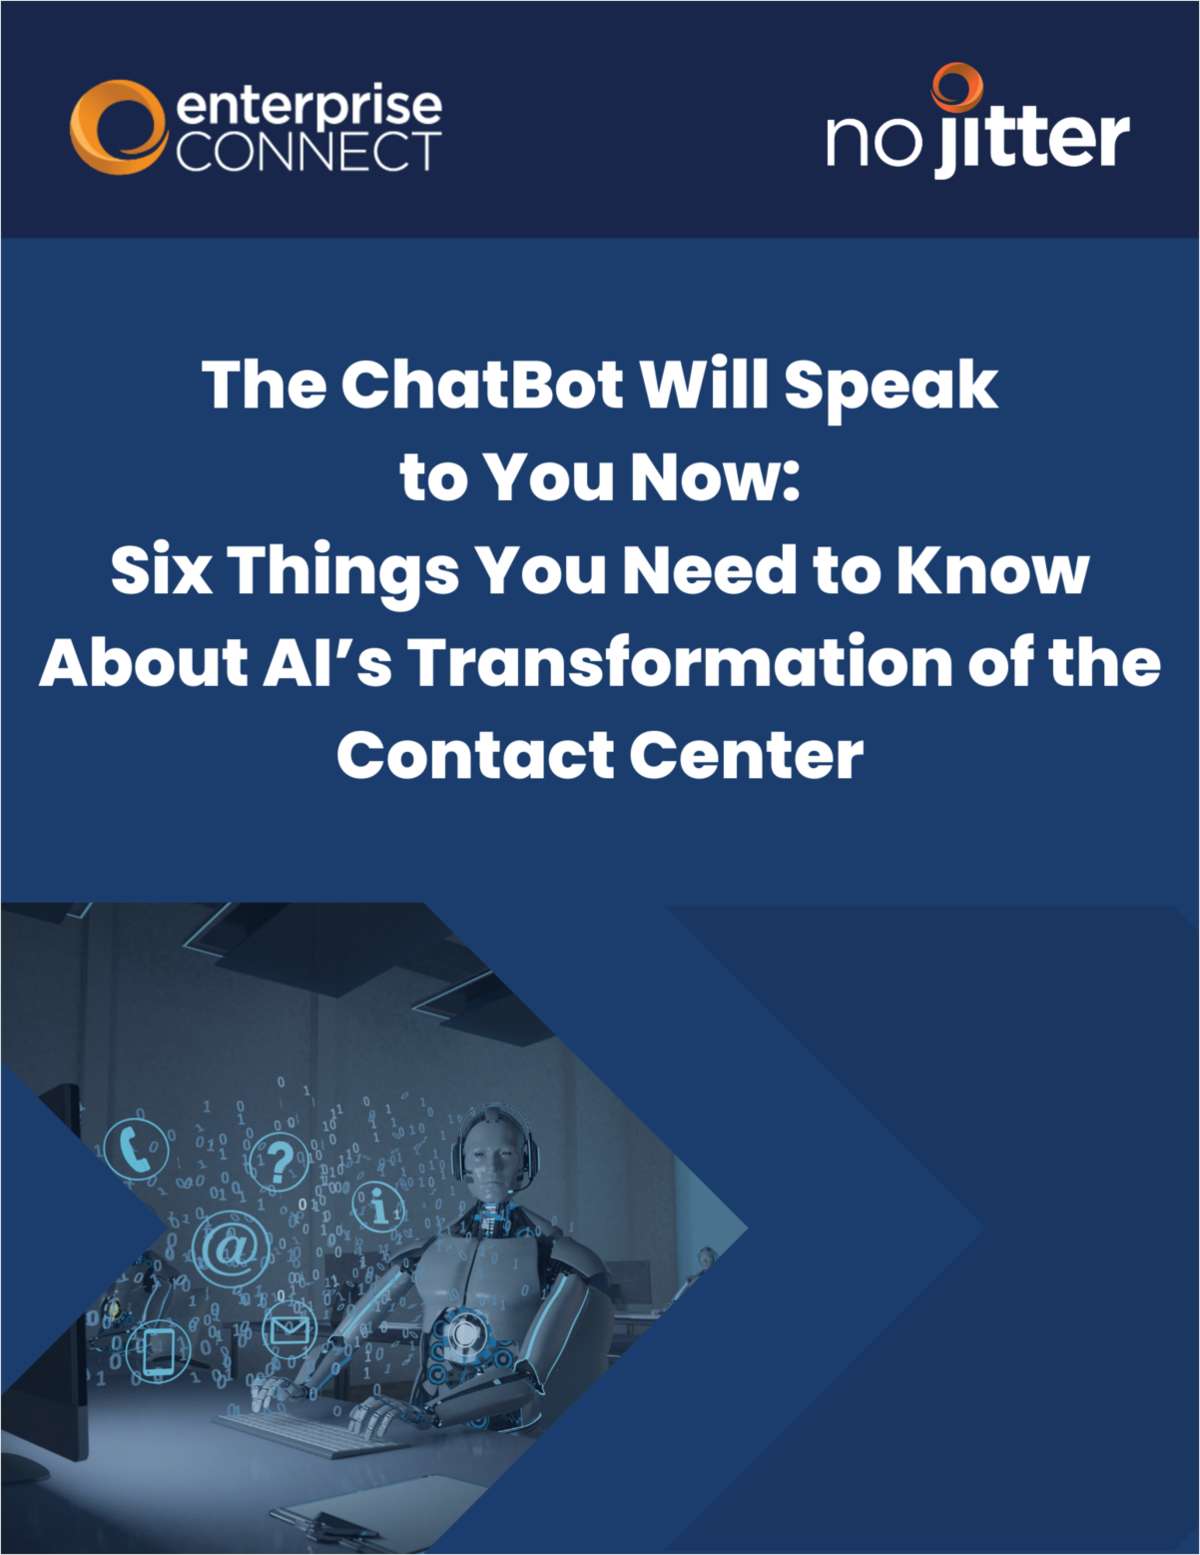 The ChatBot Will Speak to You Now: Six Things You Need to Know About AI's Transformation of the Contact Center